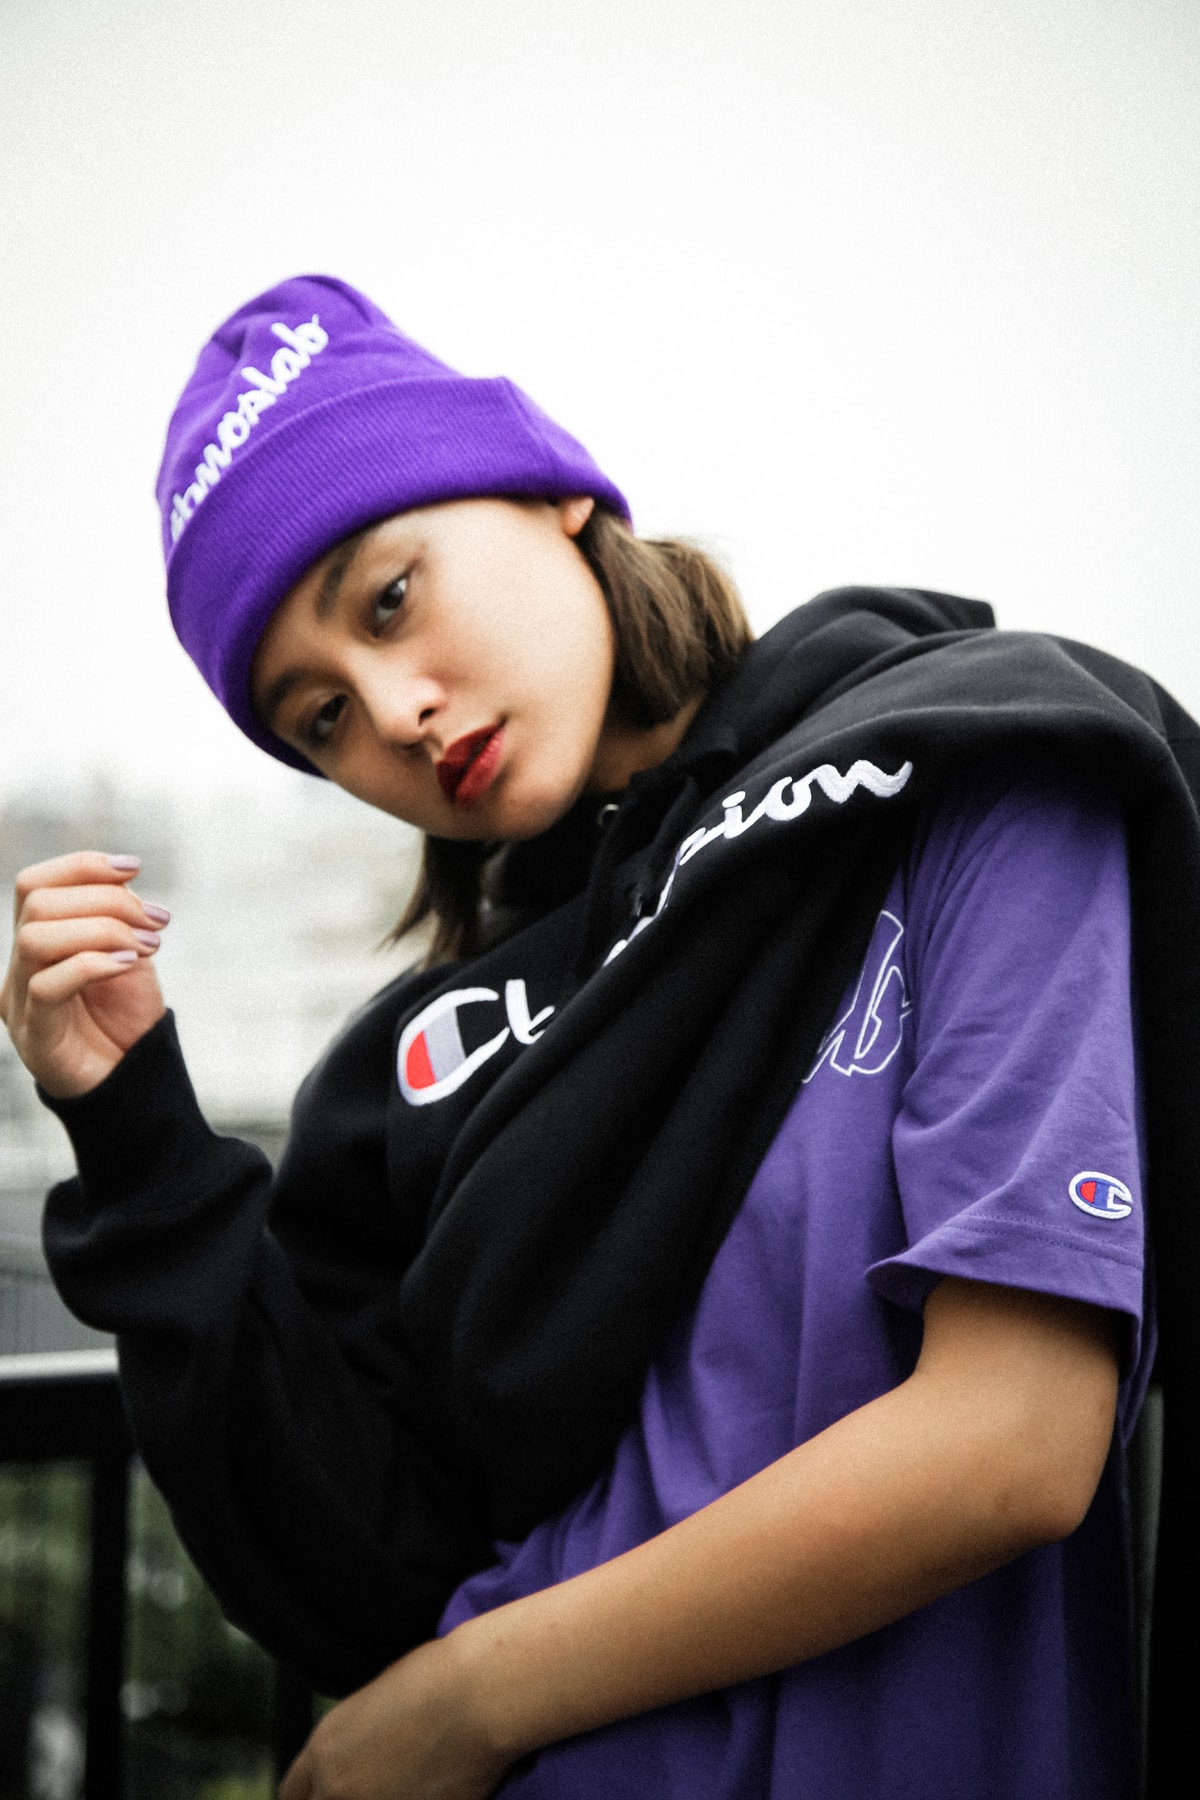 atmos LAB Champion Fall Winter 2018 Collab august 11 2018 drop release lookbook drop release date info hoodie tee shirt hat beanine